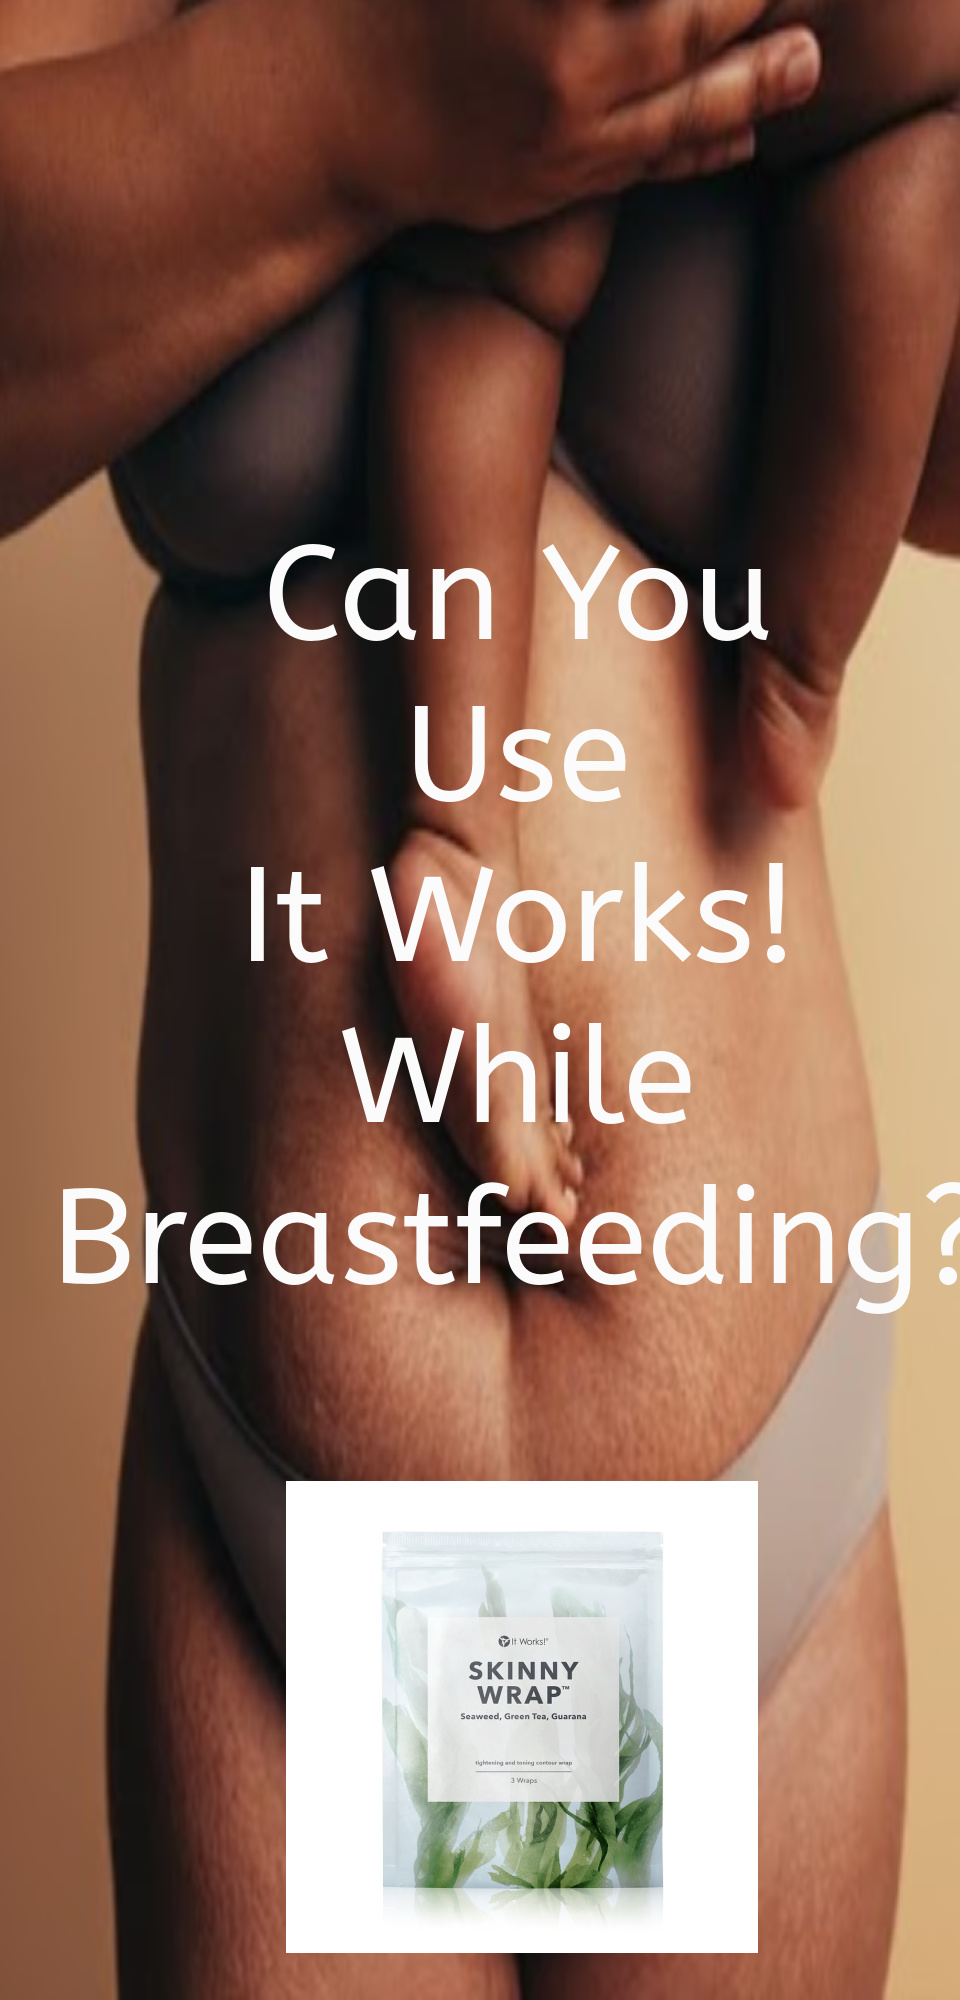 Can You Use It Works!  While Breastfeeding?